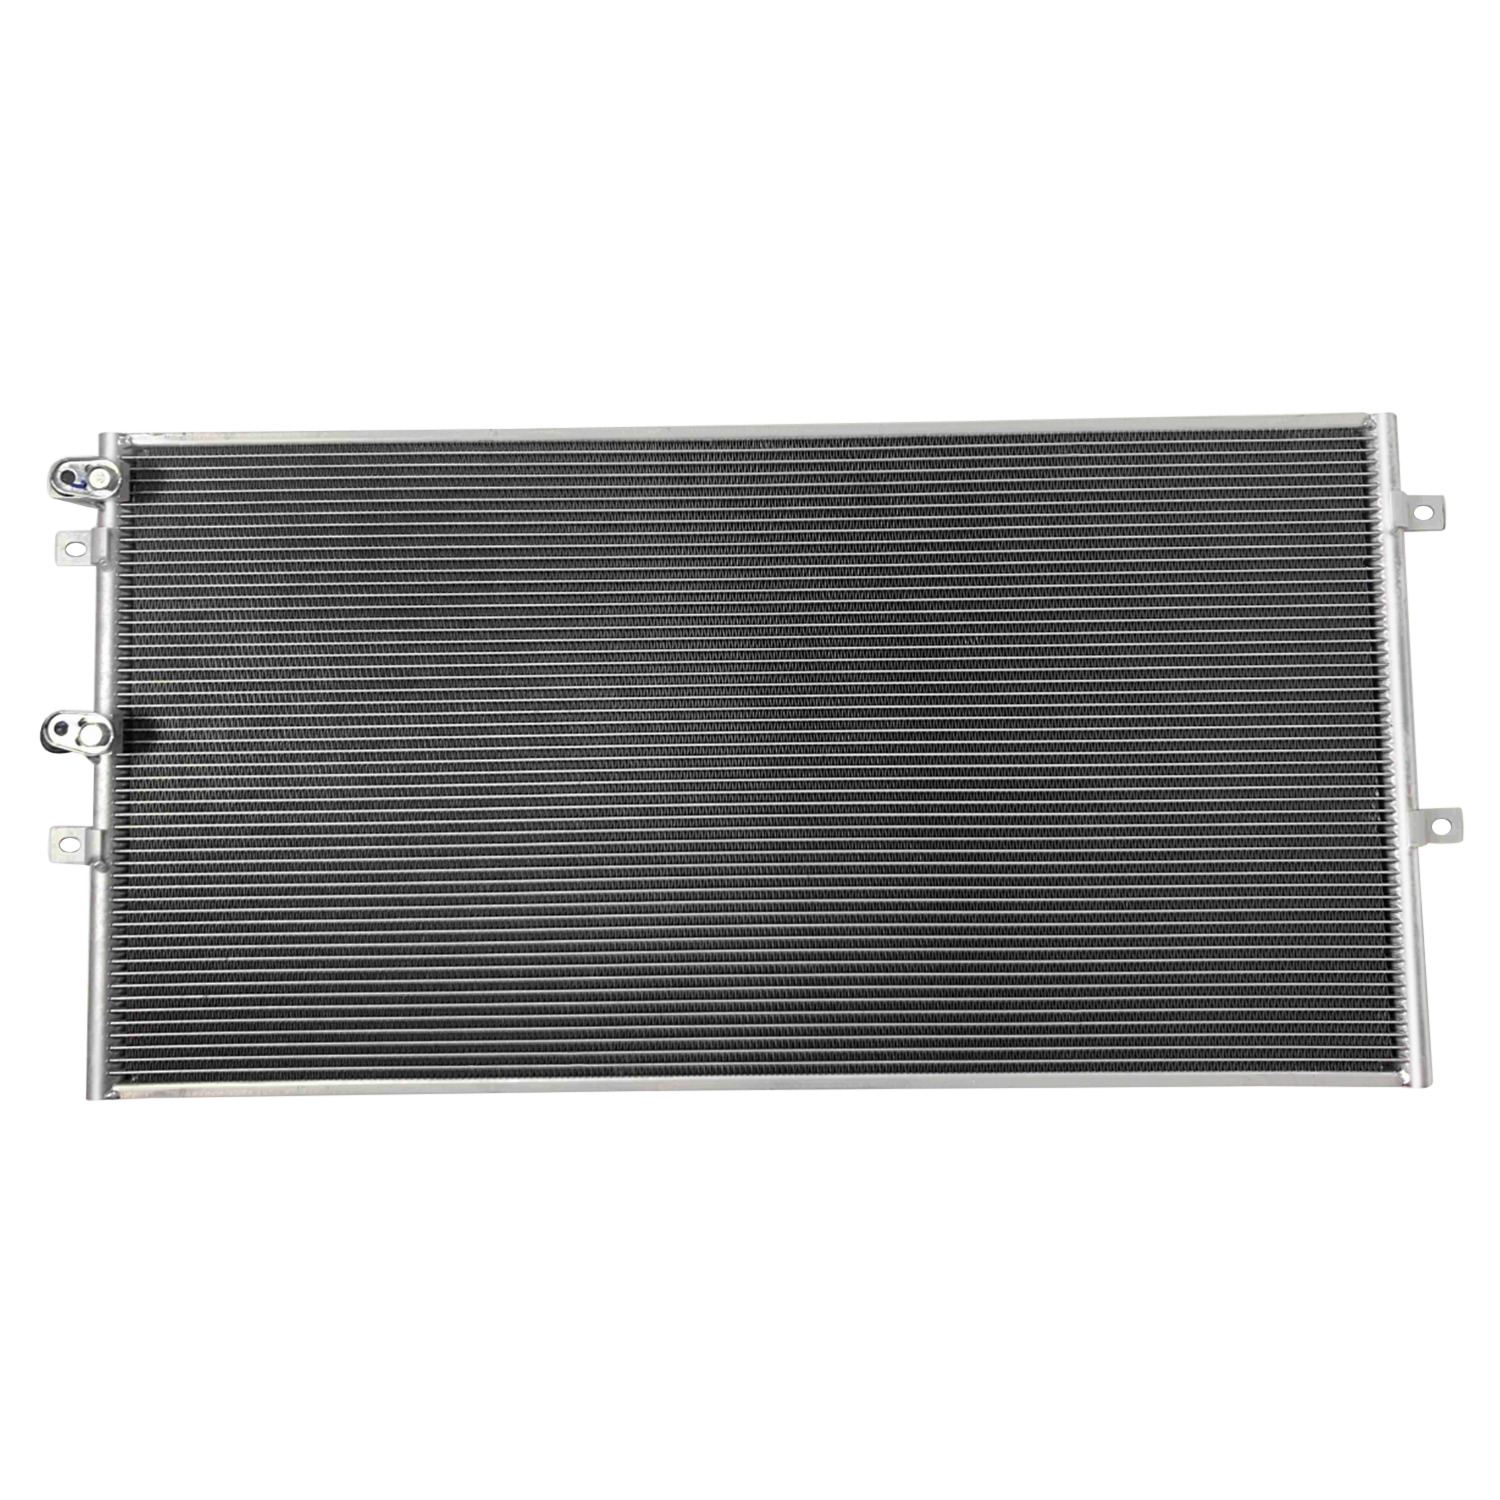 AC Condenser For 2004-2014 13 Bentley Continental Gt Gtc & Flying Spur 6.0L W12